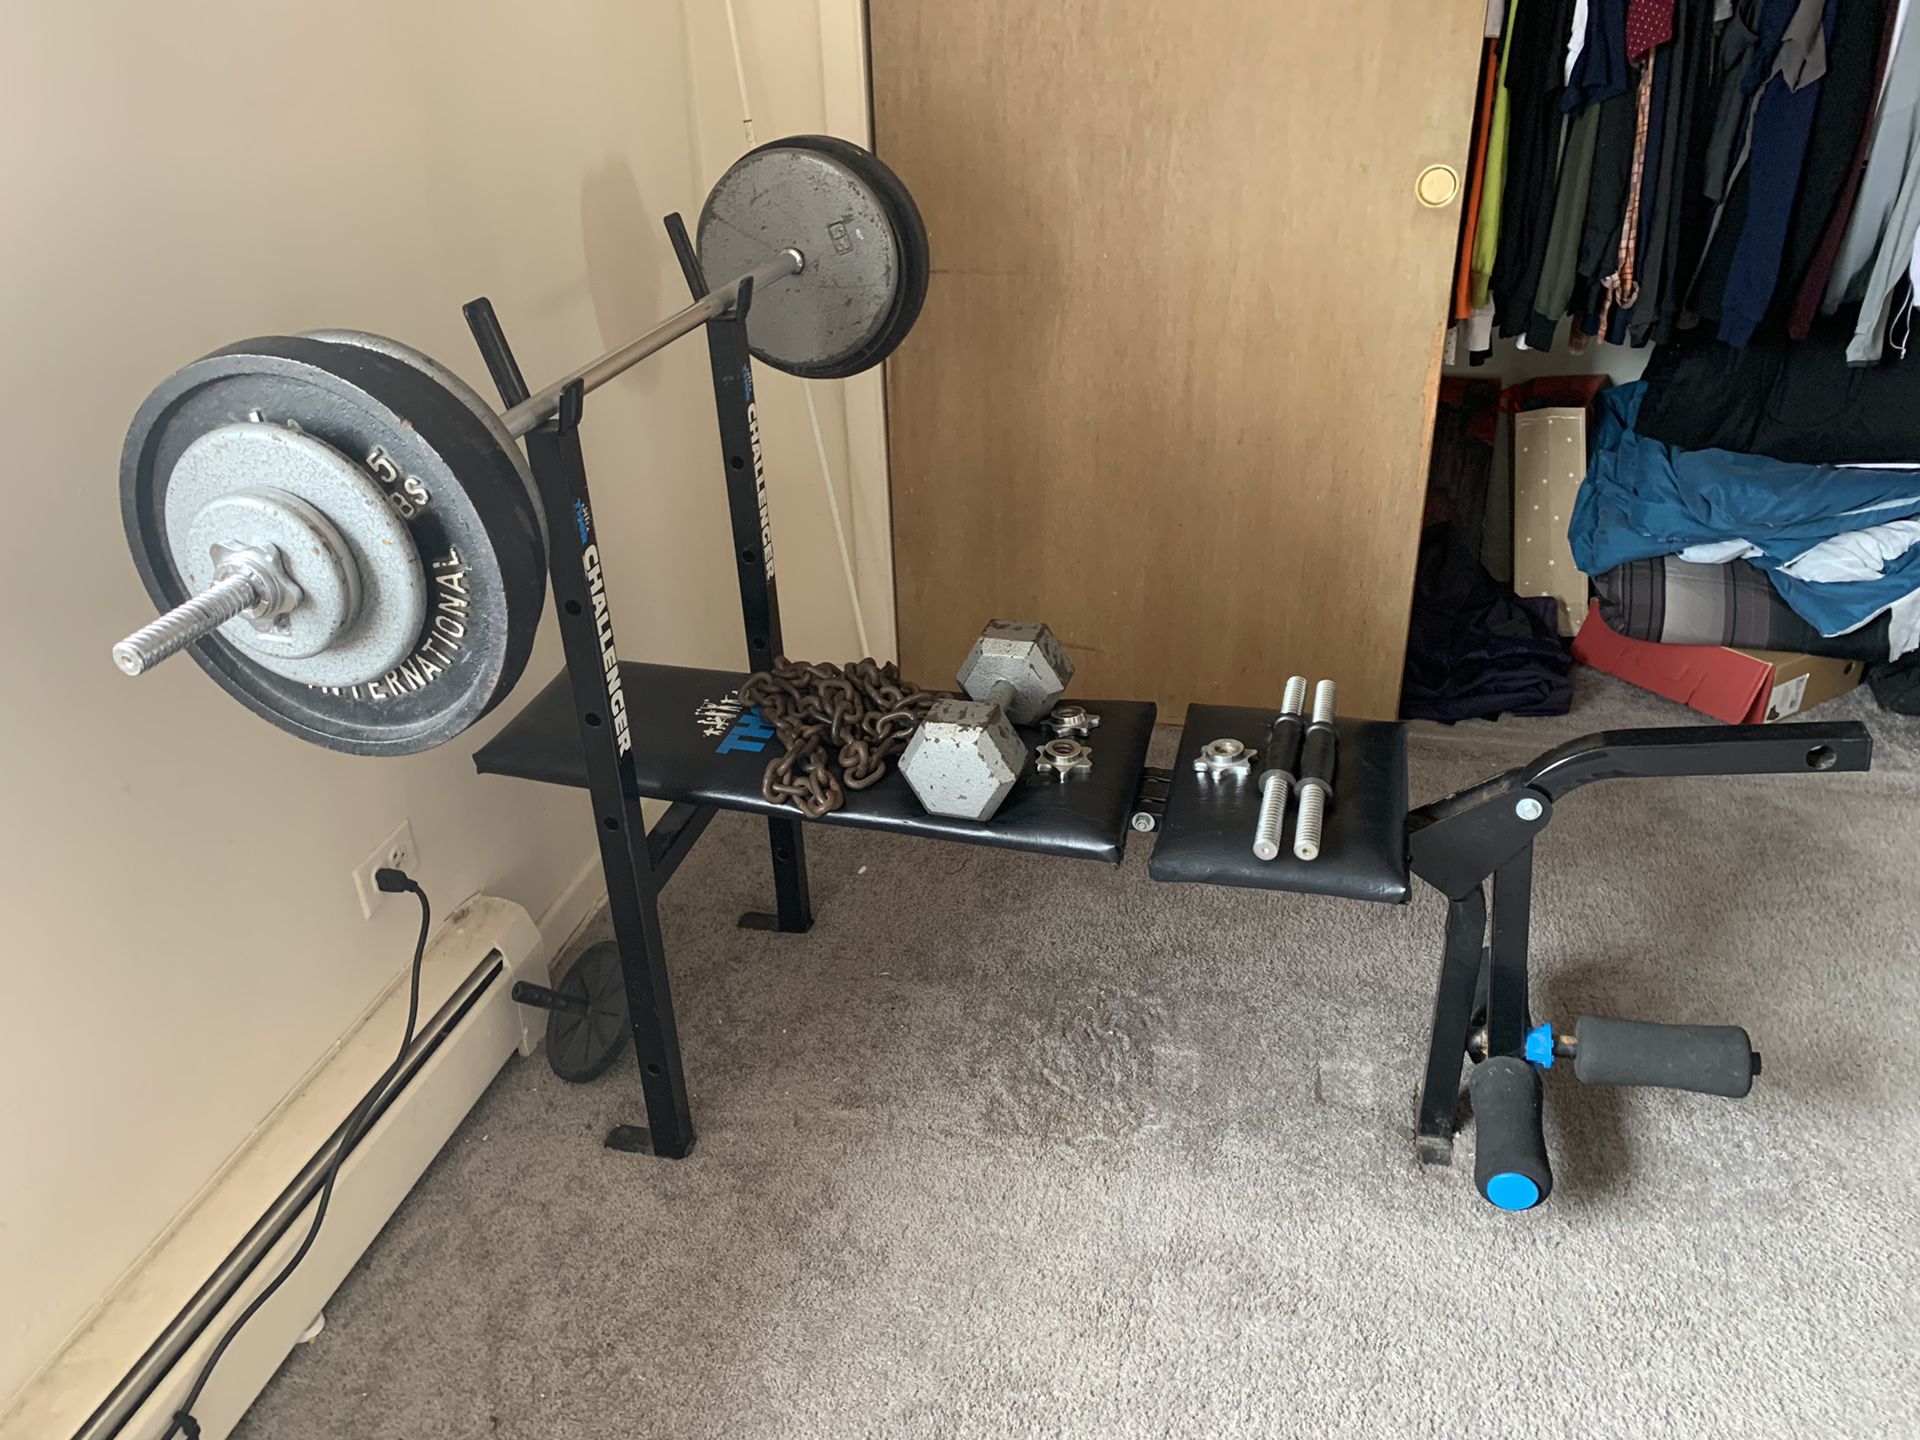 Weight set with bench and dumbbells